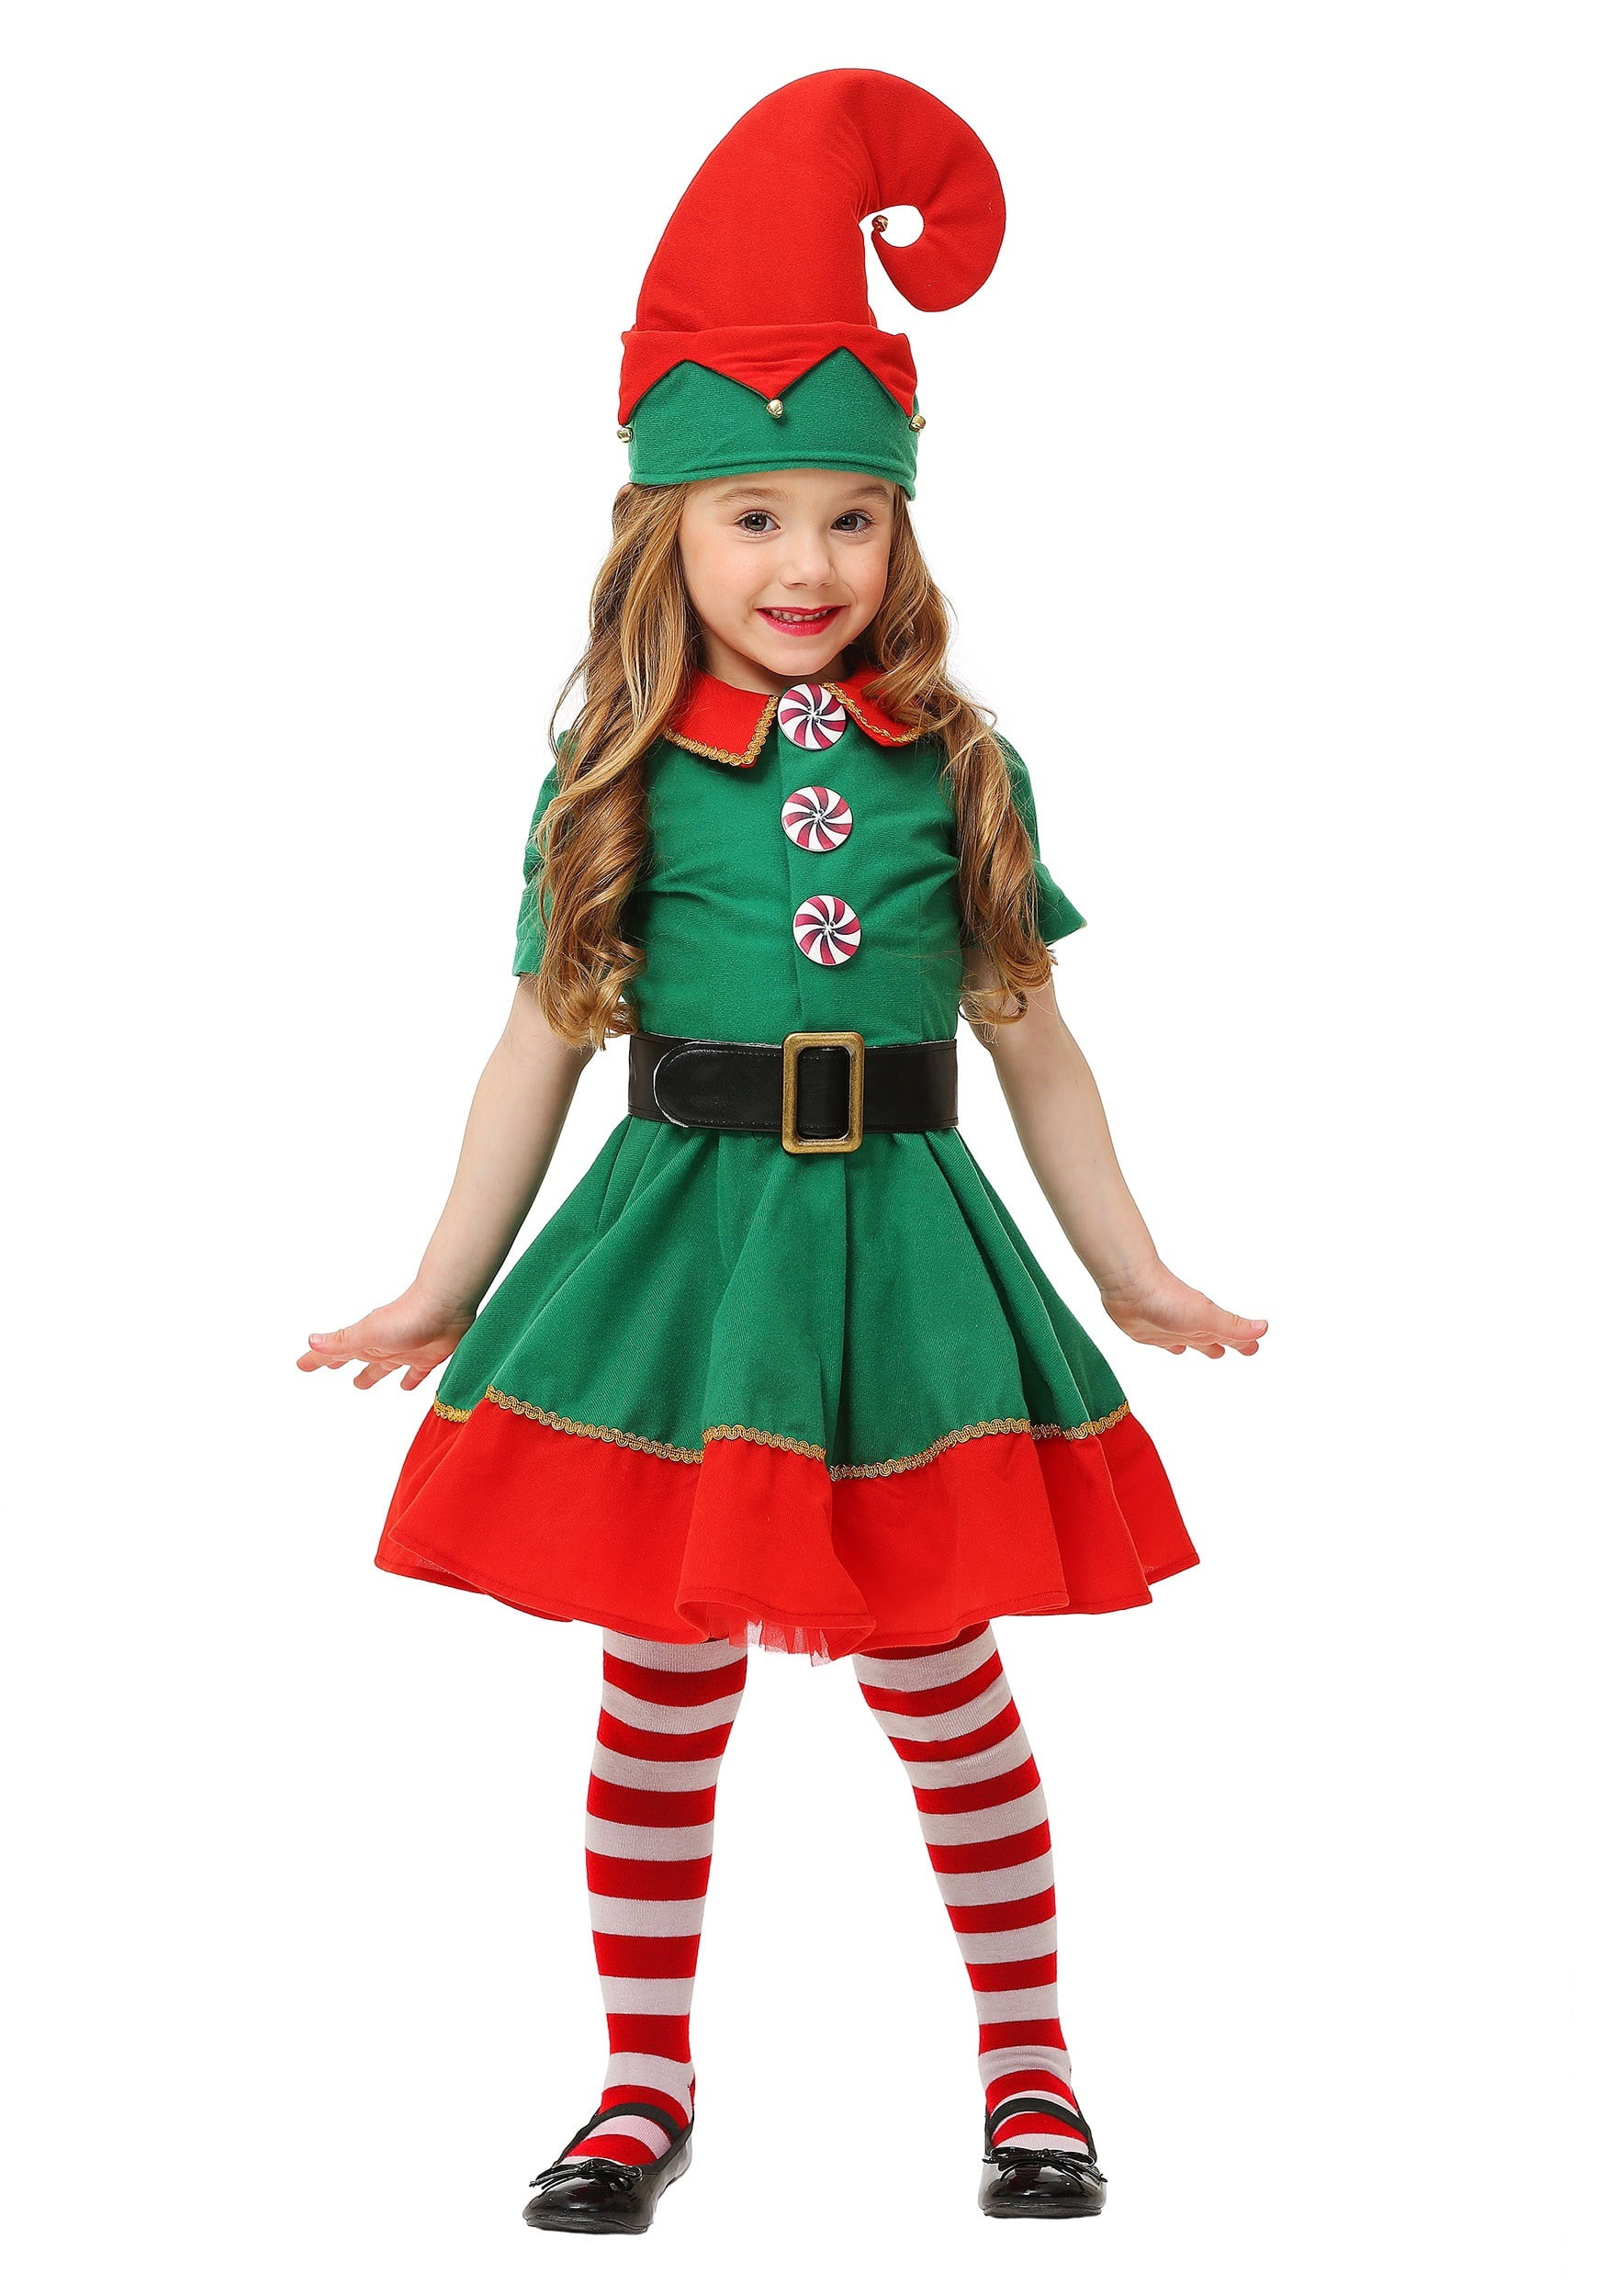 Babies Toddlers Childs Boys Girls Elf Christmas Xmas Fancy Dress Costume Outfit 